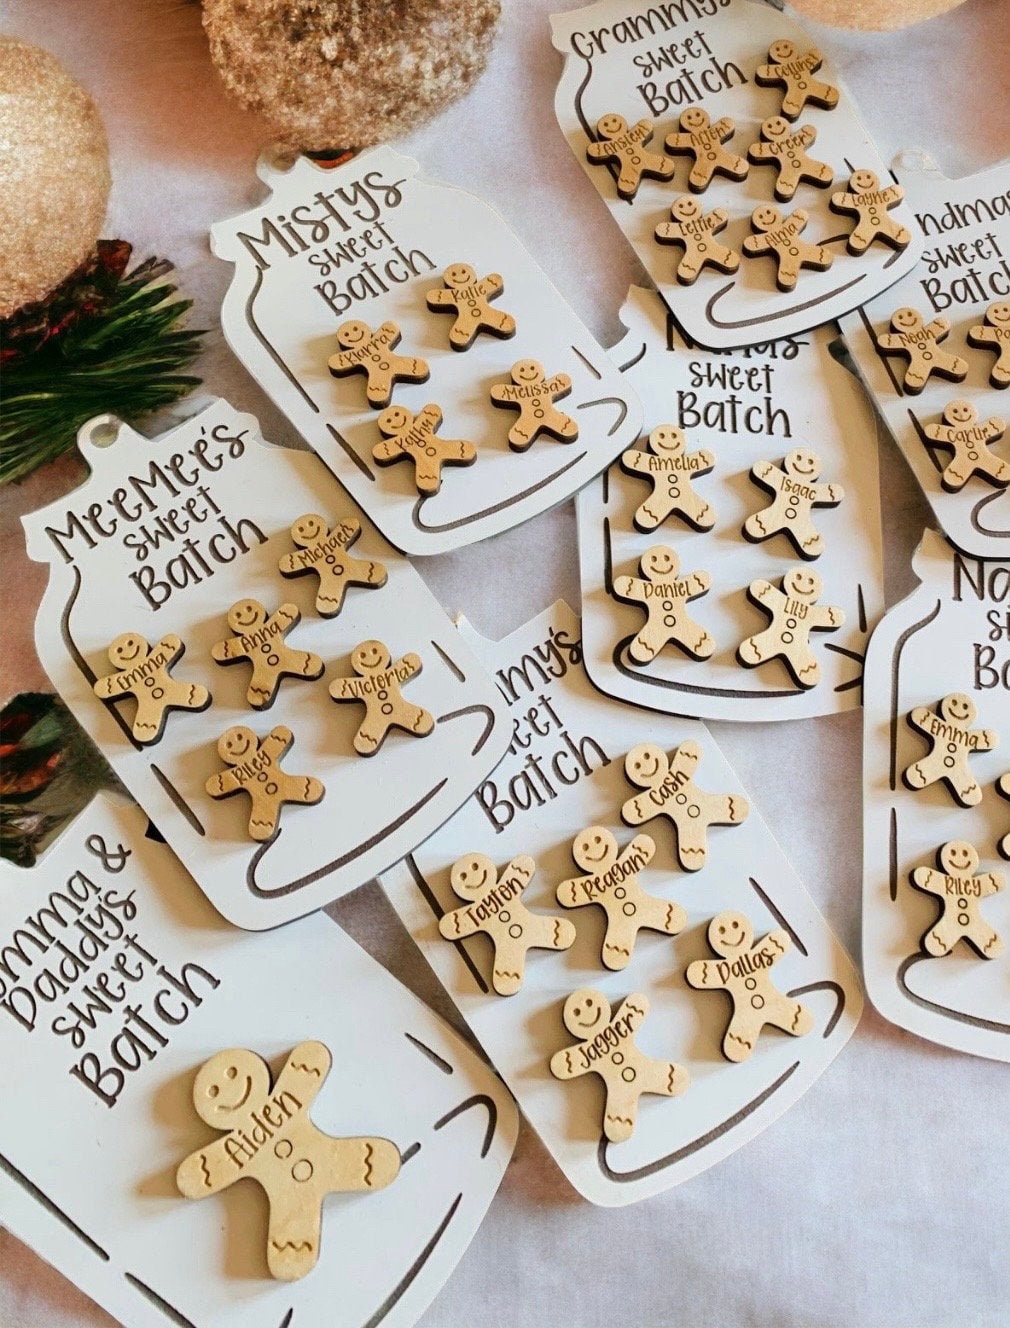 Sweet Batch Gingerbread Family Ornament, Up to 7 names, Wooden